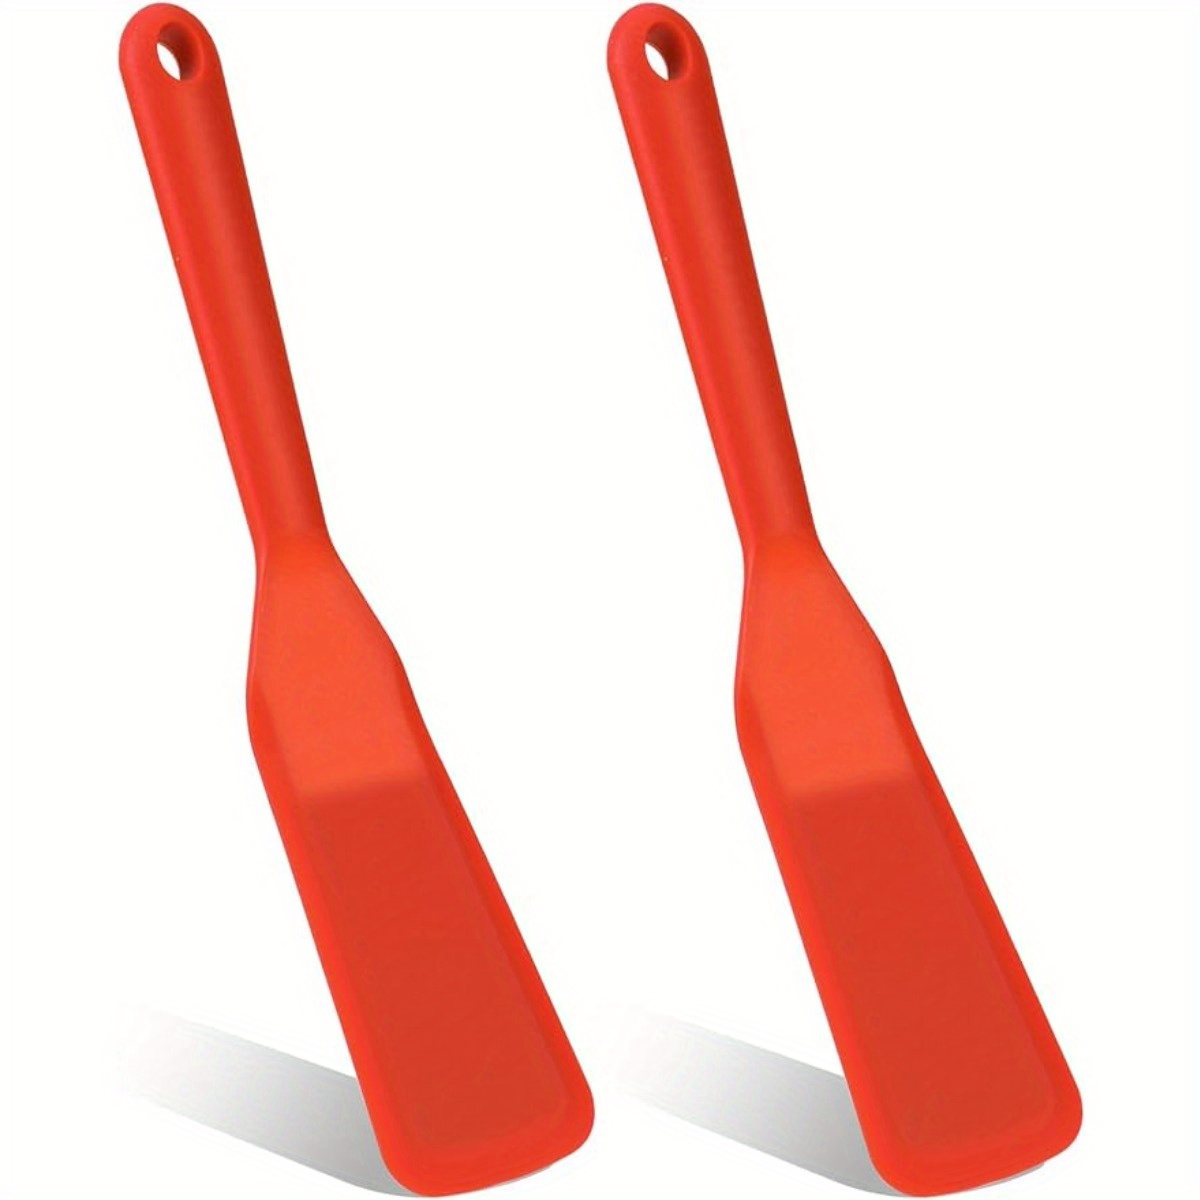 The ORIGINAL Crepe Spreader and Spatula Kit - 2 Piece Set (5” Spreader and  14” Spatula) Convenient S…See more The ORIGINAL Crepe Spreader and Spatula